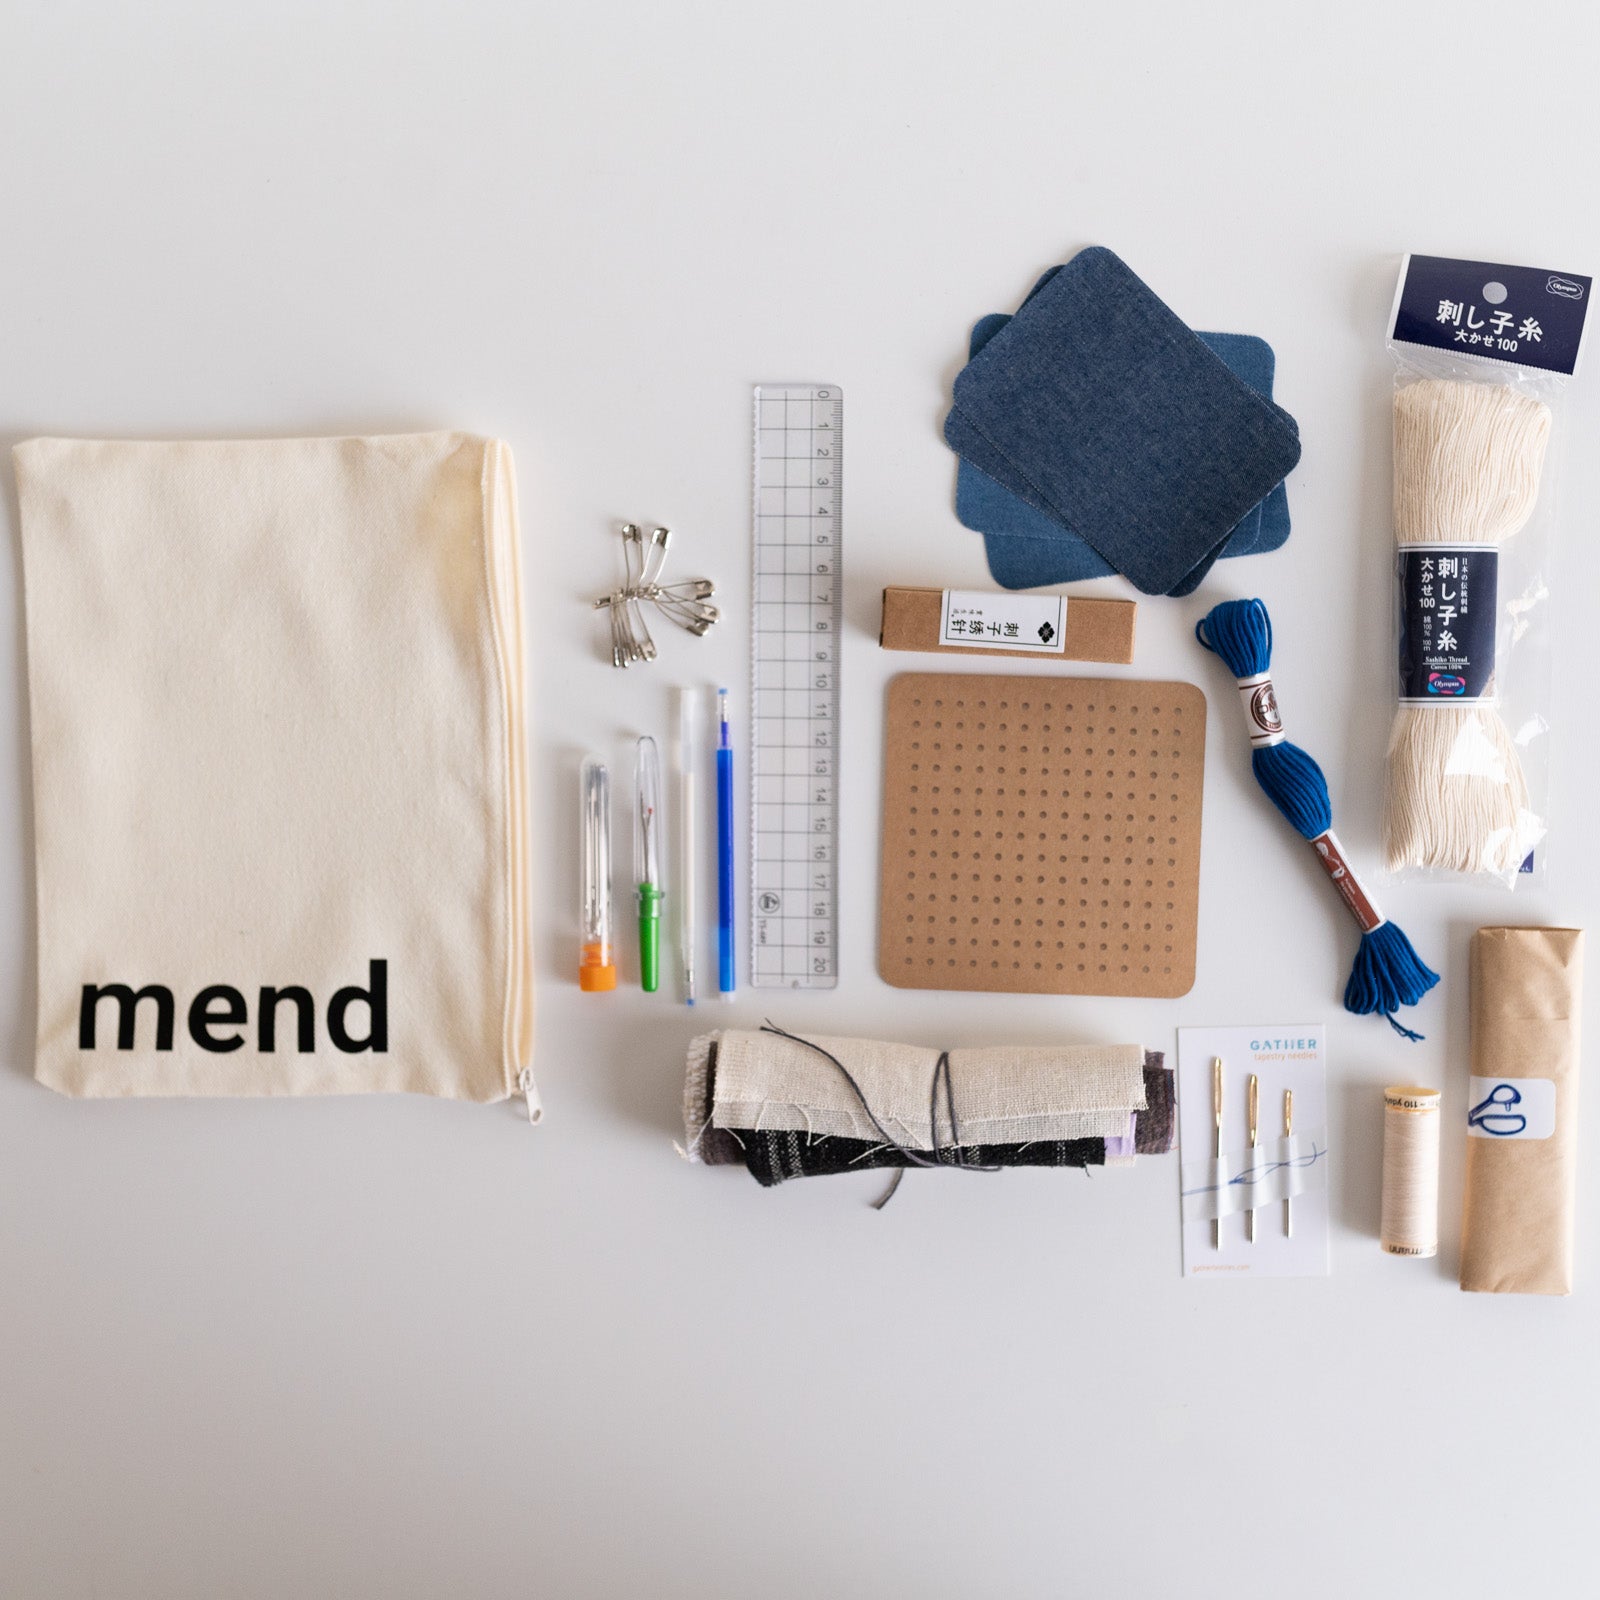 Re-NEW Mending Kit to repair textiles using stitches